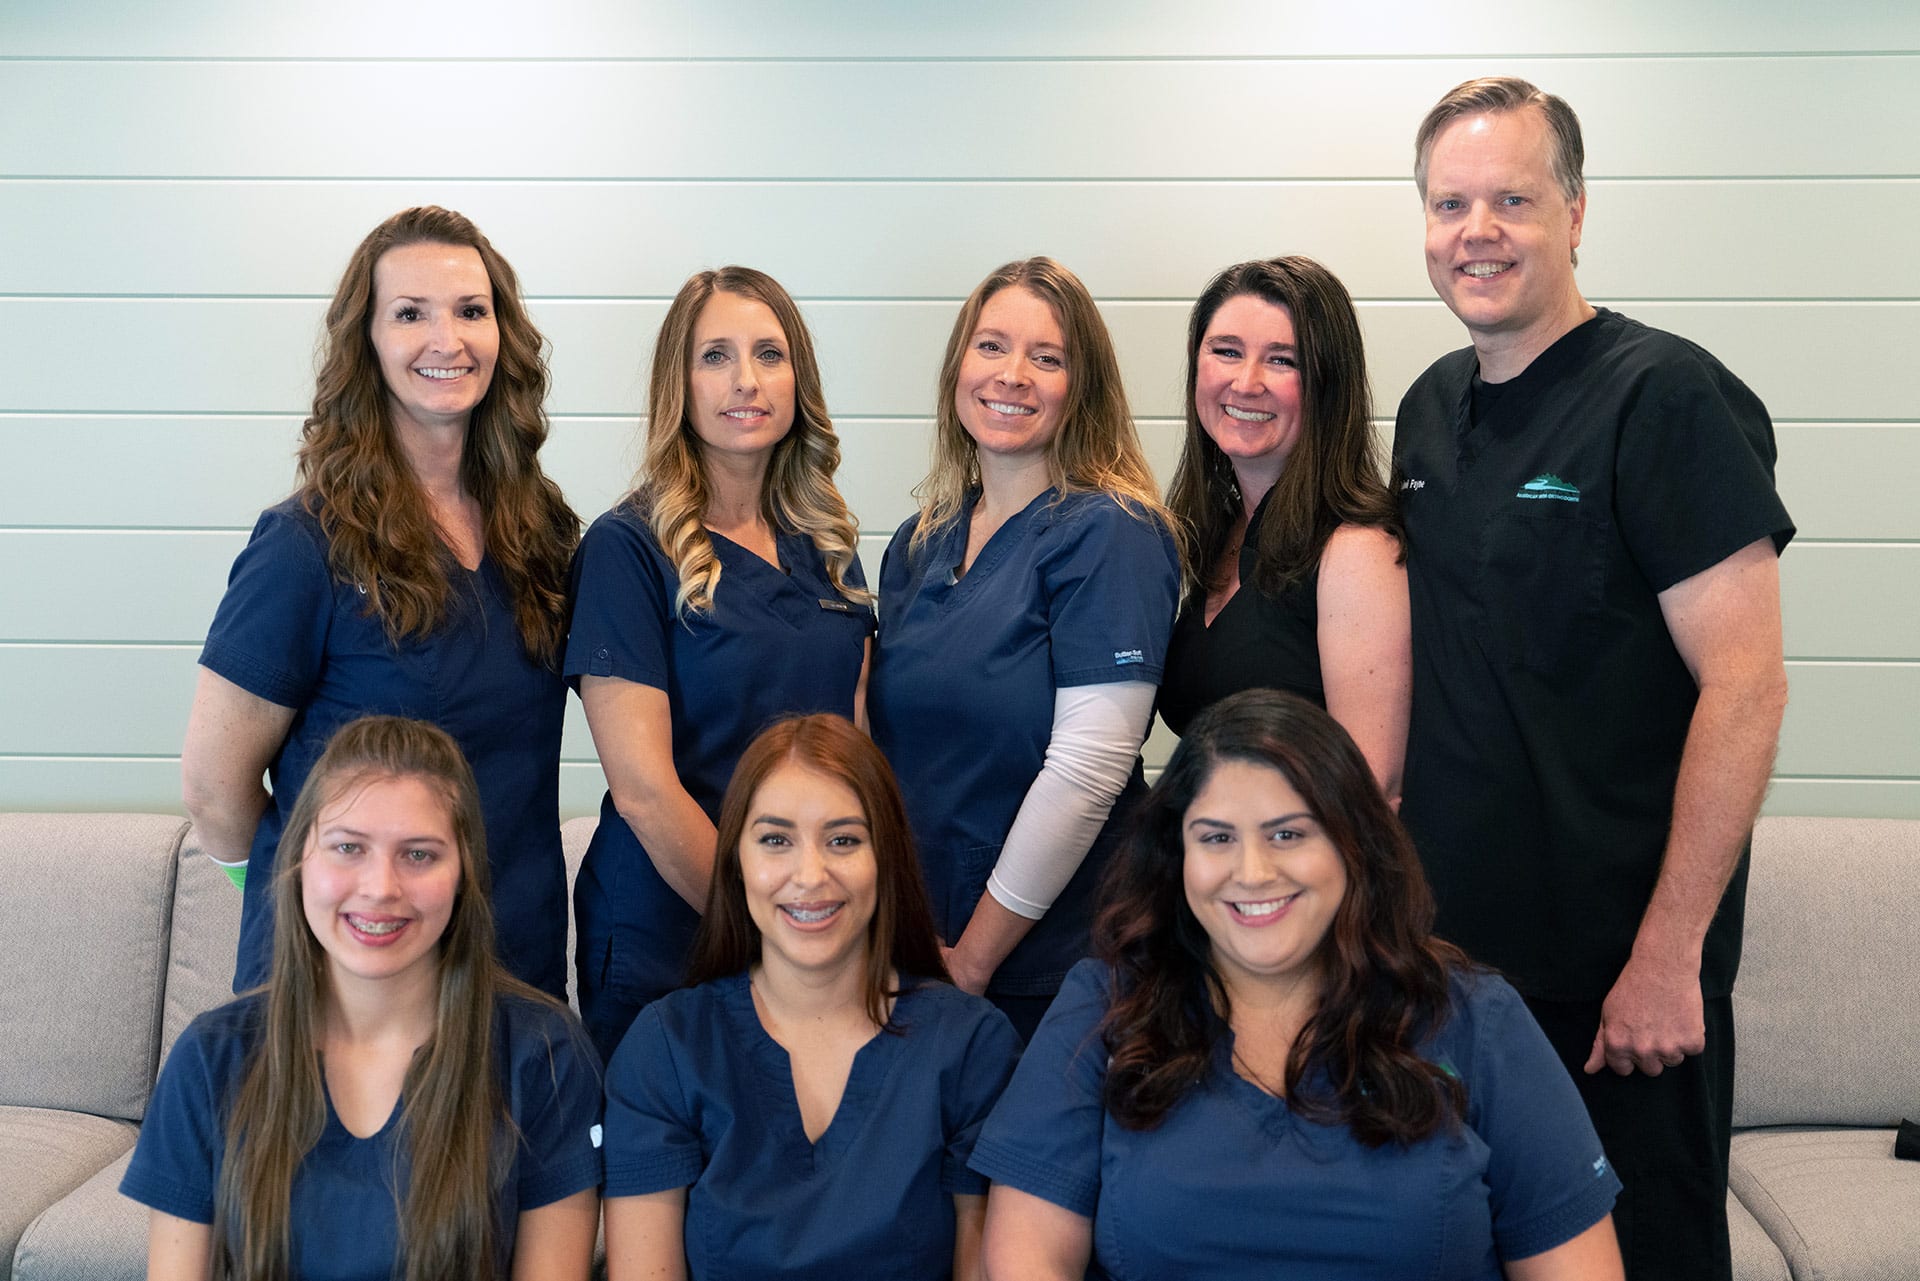 Dr. Michael H. Payne and the American River Orthodontics team